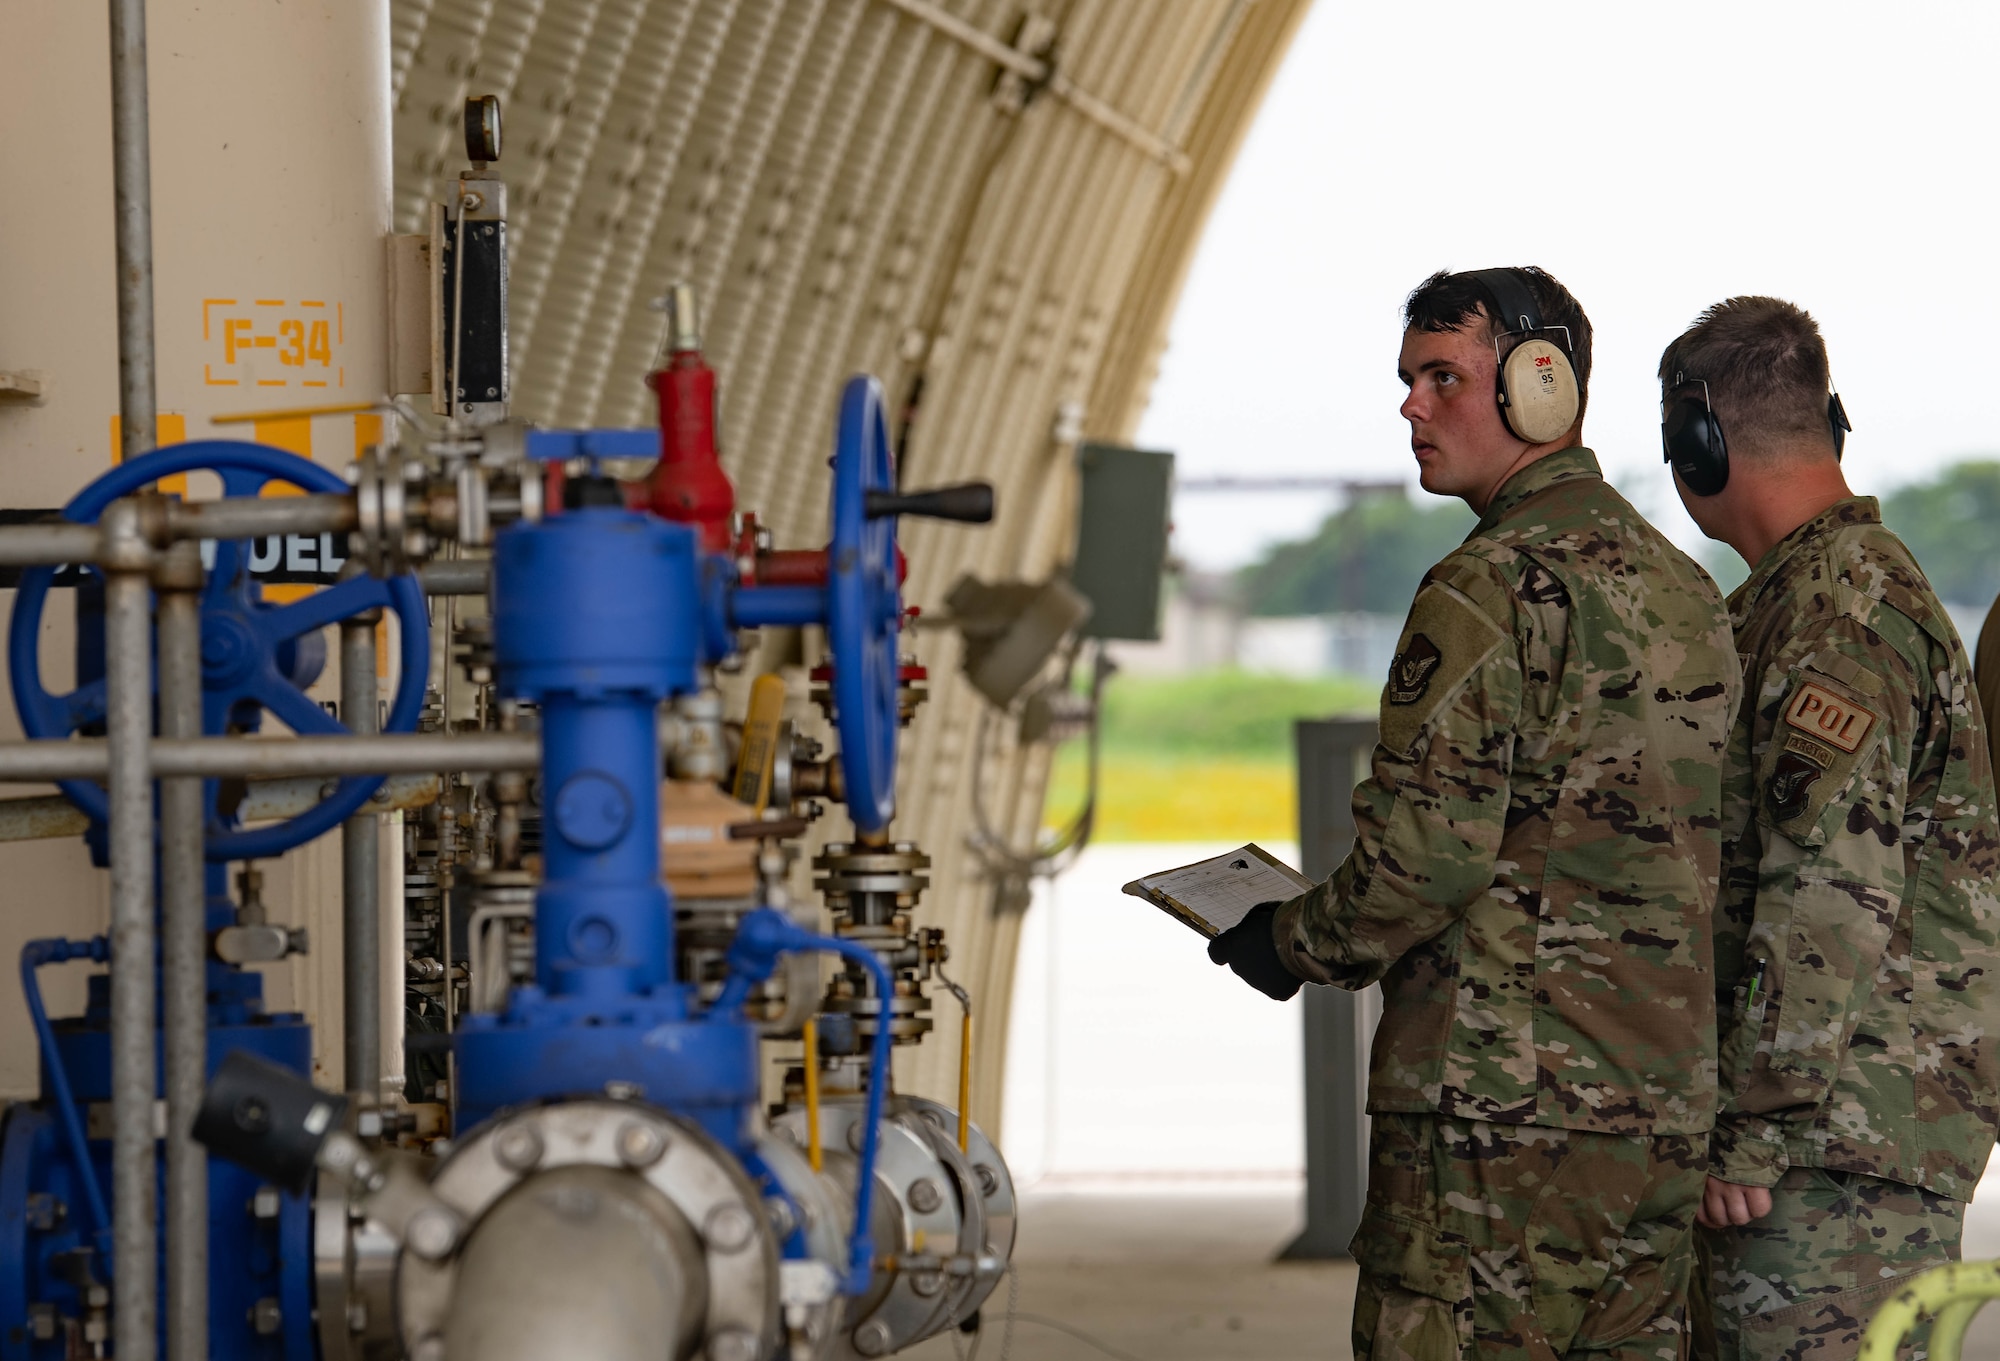 Airman 1st Class Dennis Haggermaker, 8th Logistics Readiness Squadron fuels distribution operator, monitors hot pit refueling of an F-35A Lightning II at Kunsan Air Base, Republic of Korea, July 11, 2022. U.S. Air Force F-35 aircraft from Eielson Air Force Base, Alaska arrived in the Republic of Korea to conduct training flights with ROKAF to enhance interoperability between the two Air Forces on and around the Korean Peninsula. (U.S. Air Force photo by Senior Airman Shannon Braaten)